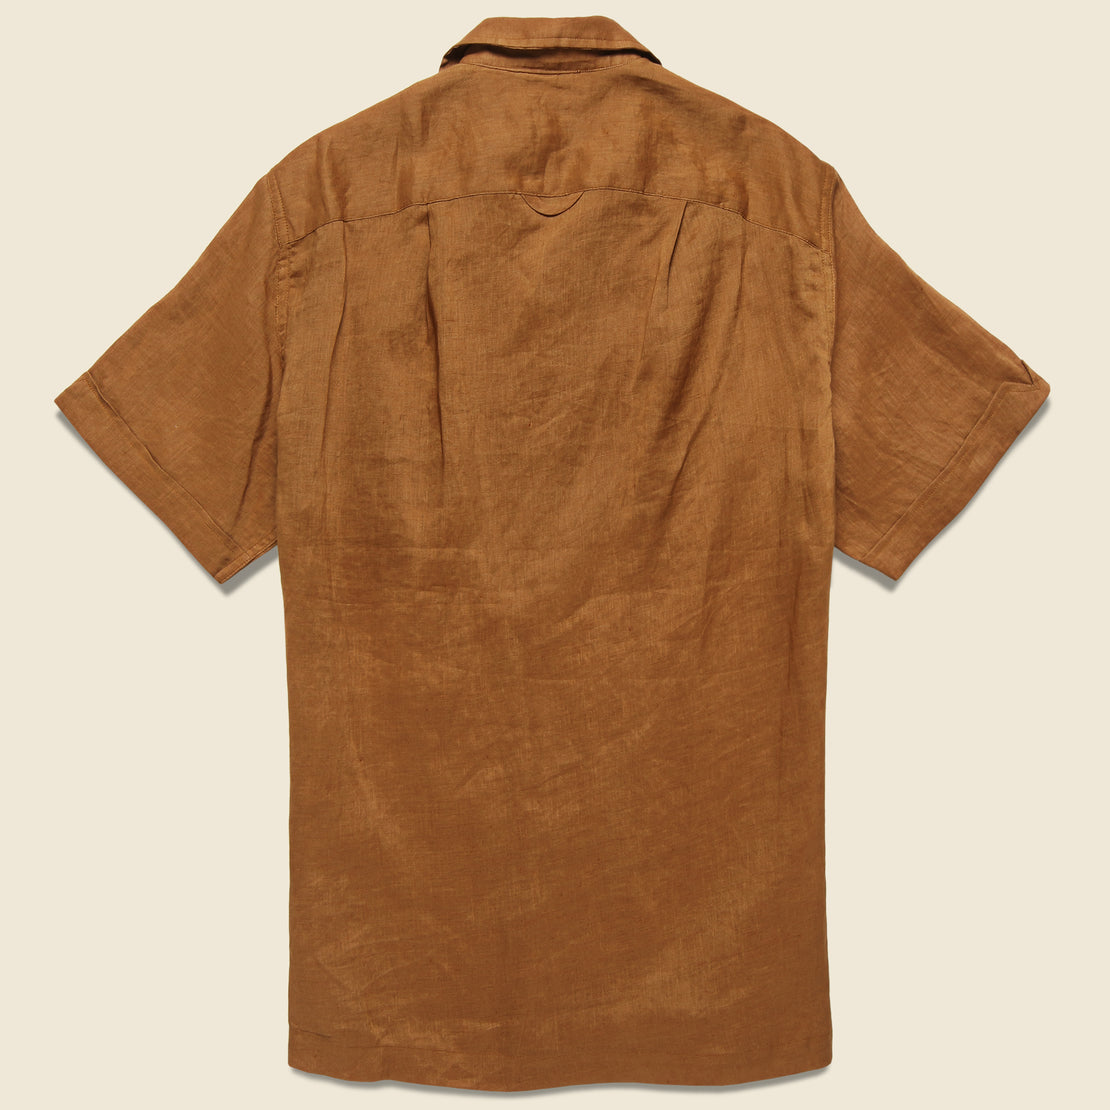 Vacation Shirt - Brown - Monitaly - STAG Provisions - Tops - S/S Woven - Solid